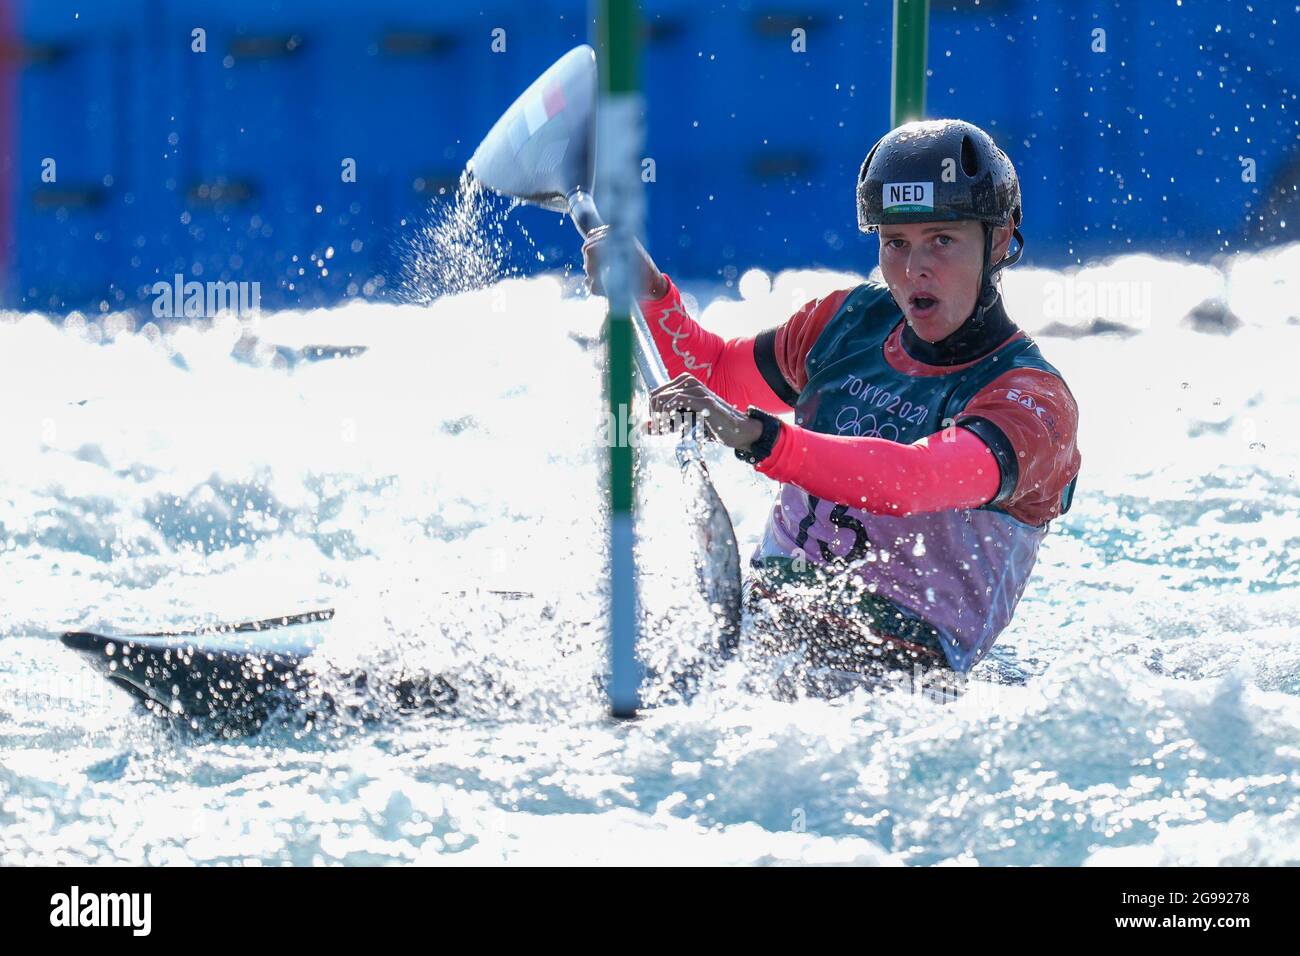 TOKYO, JAPAN - JULY 25: Martina Wegman of the Netherlands competing on Women's Kayak Heats 2nd Run during the Tokyo 2020 Olympic Games at the Kasai Canoe Slalom Centre on July 25, 2021 in Tokyo, Japan (Photo by Yannick Verhoeven/Orange Pictures) NOCNSF Stock Photo